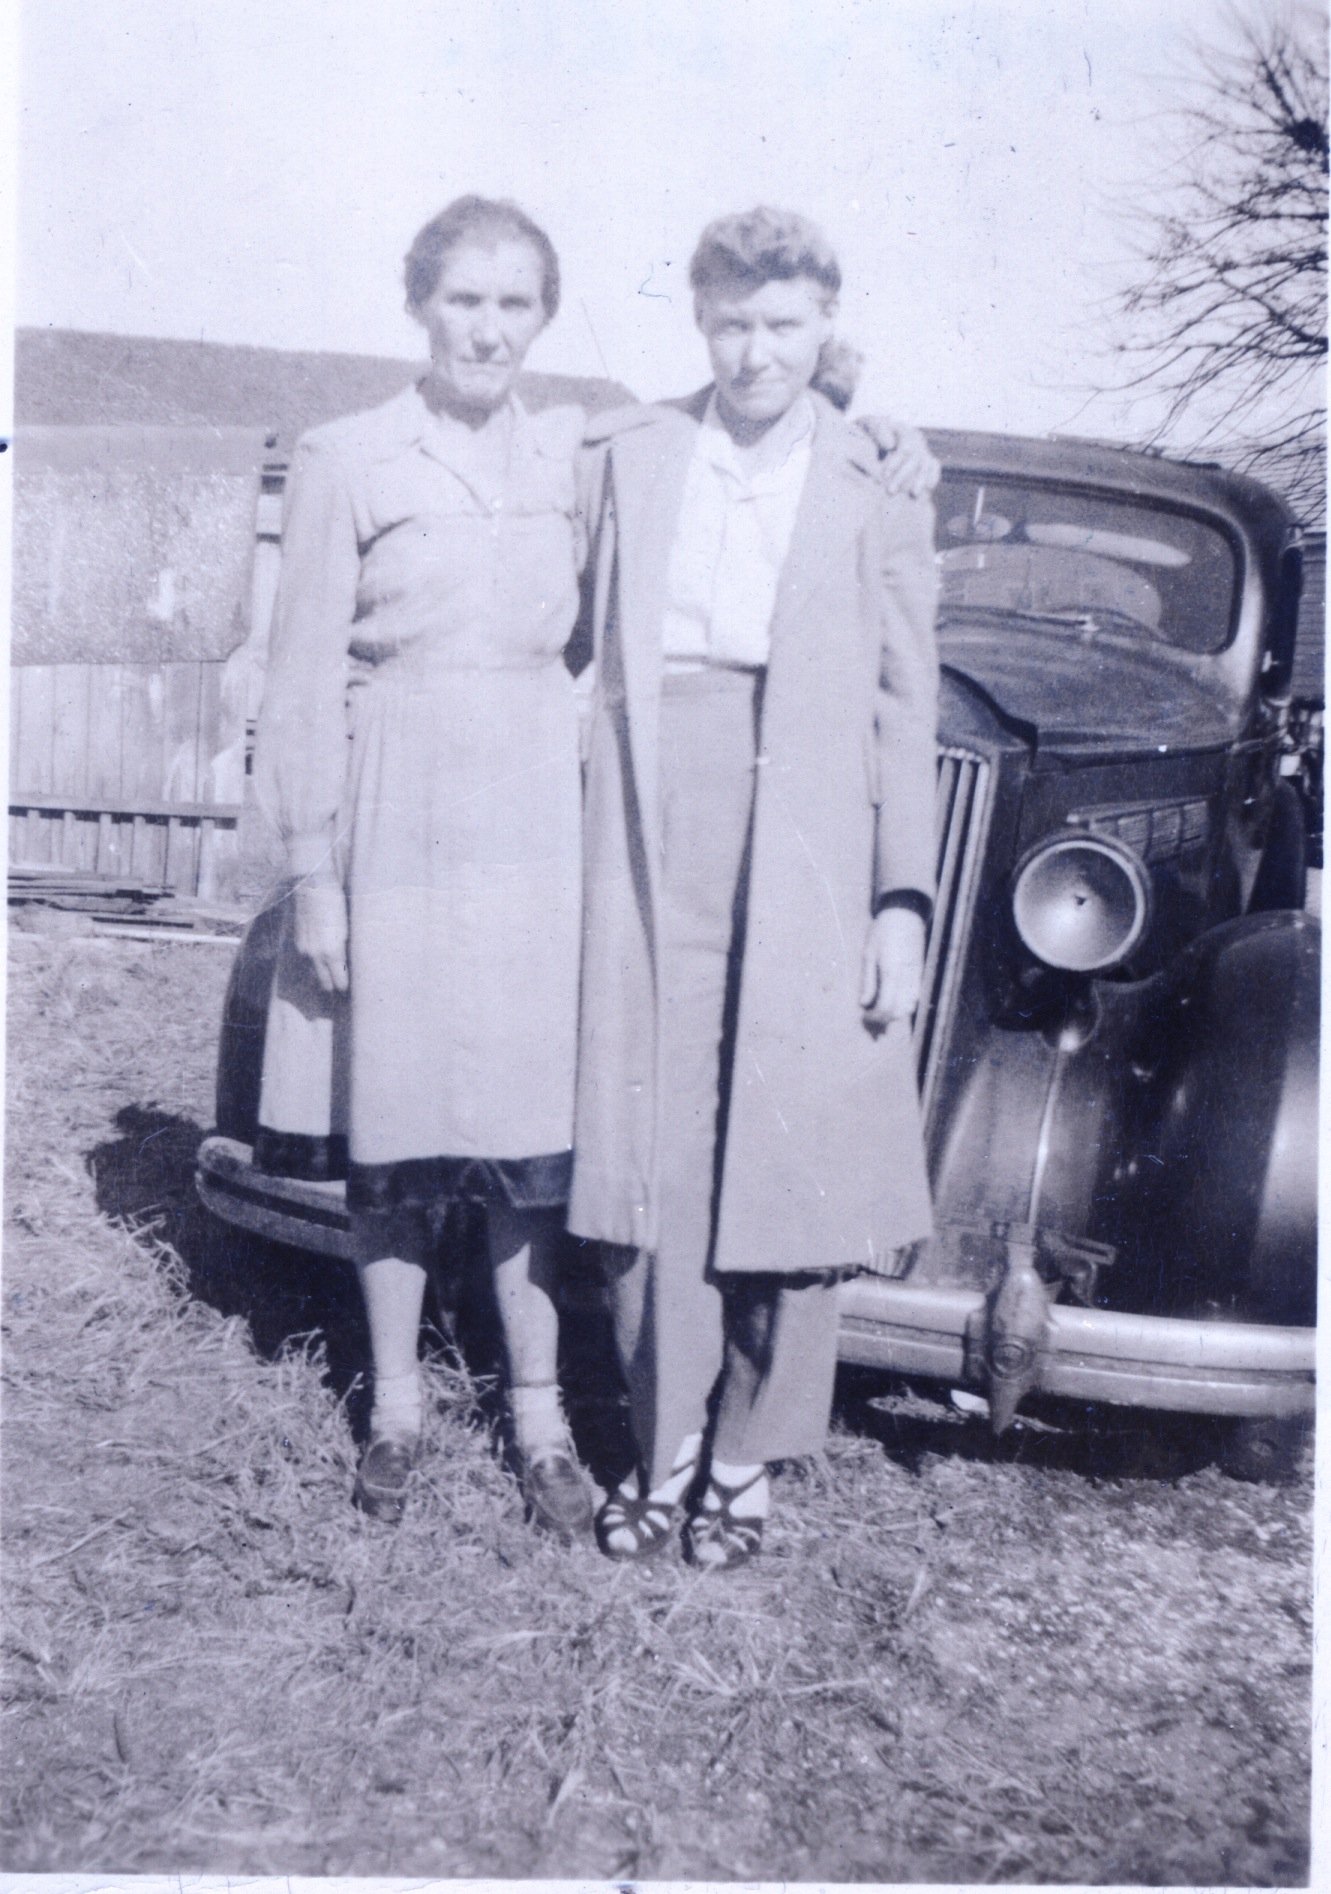 Dorie and Wilma Guthrie (mother and daughter)